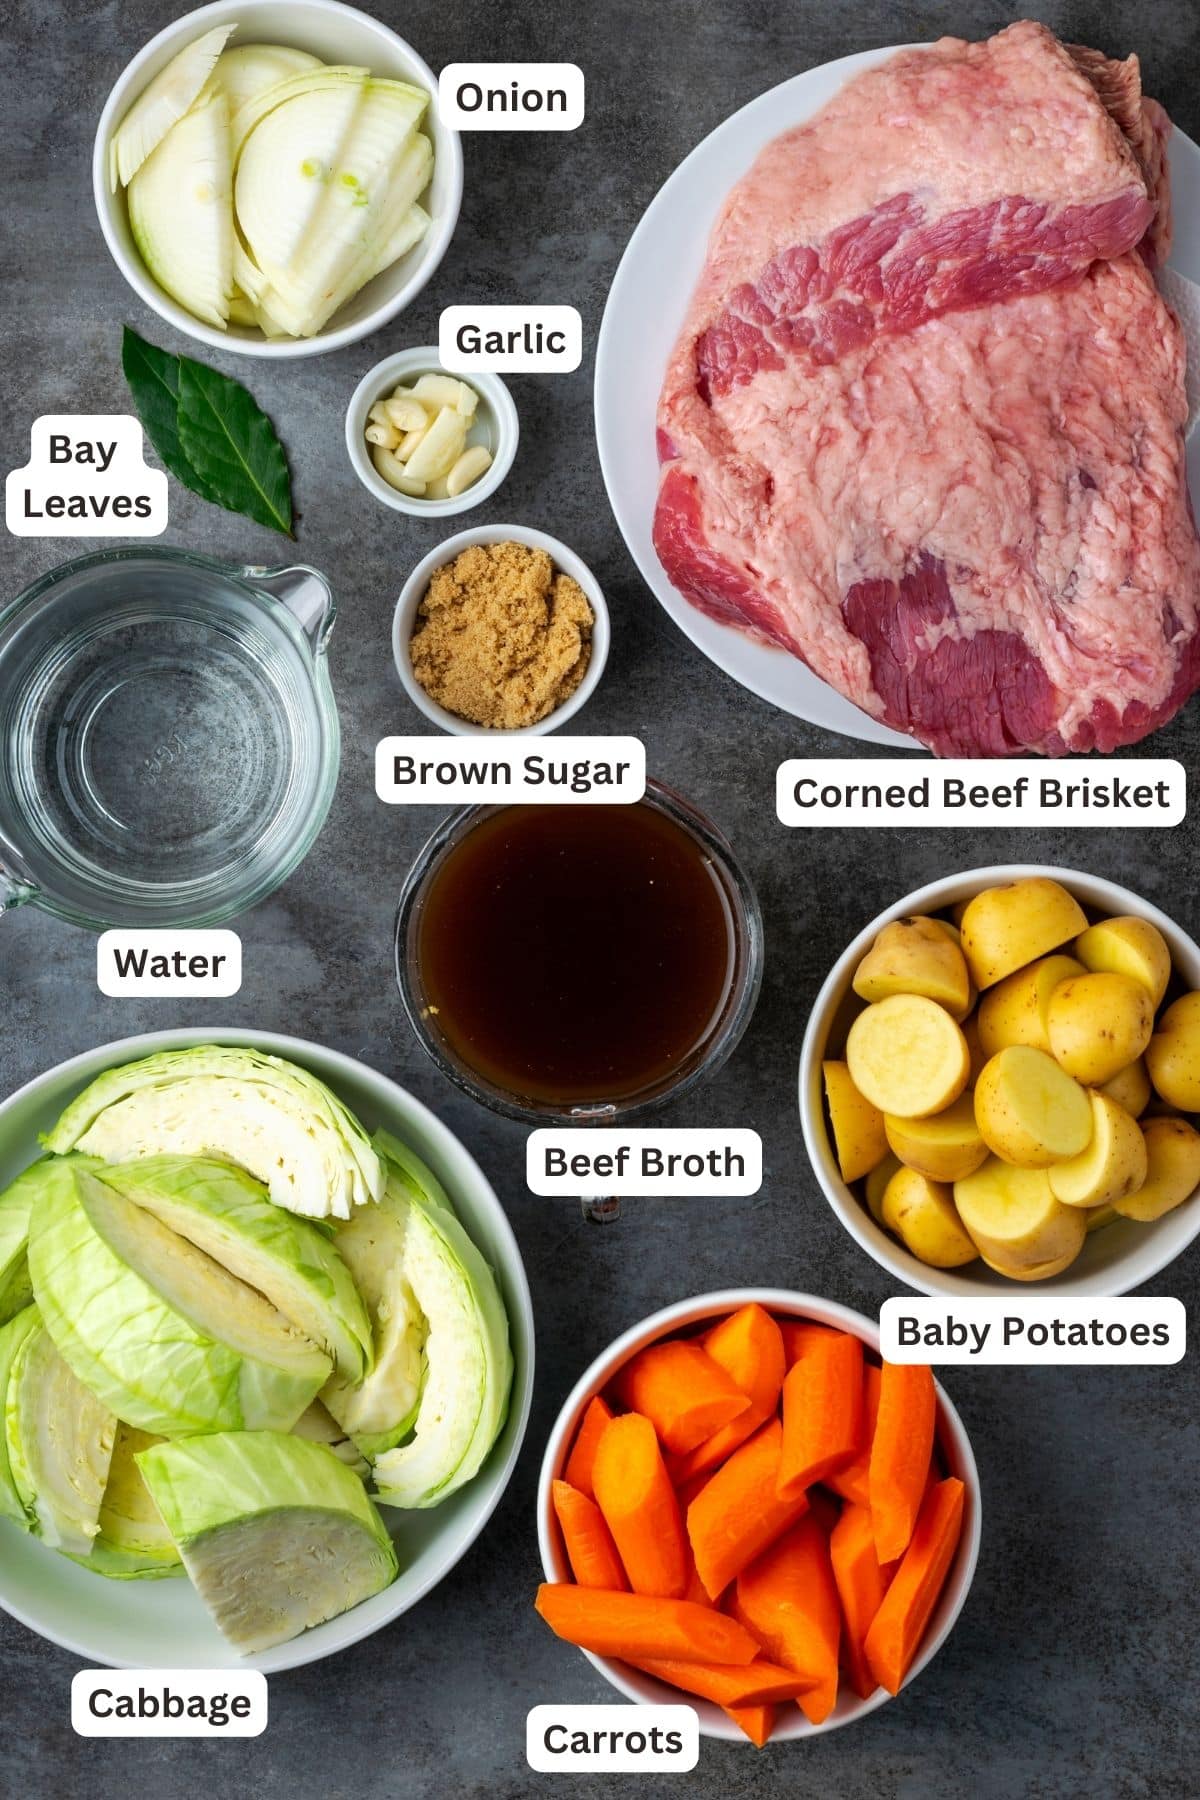 Ingredients for Instant Pot corned beef and cabbage with text labels overlaying each ingredient.